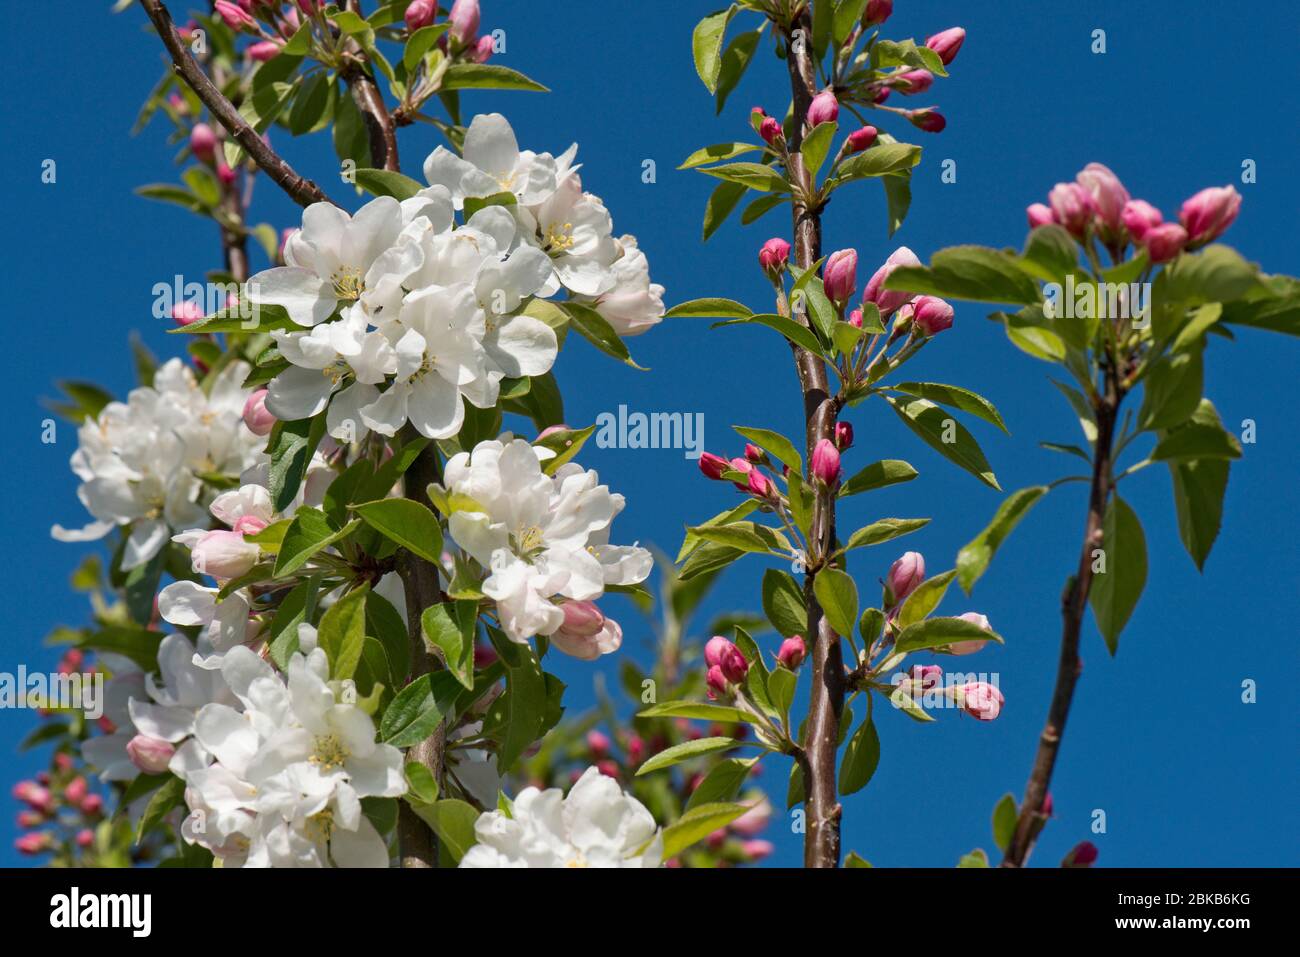 Ornamental, garden, crab apple (Malus 'John Downie') with snow white flowers against a blue spring sky, Berkshire, April Stock Photo